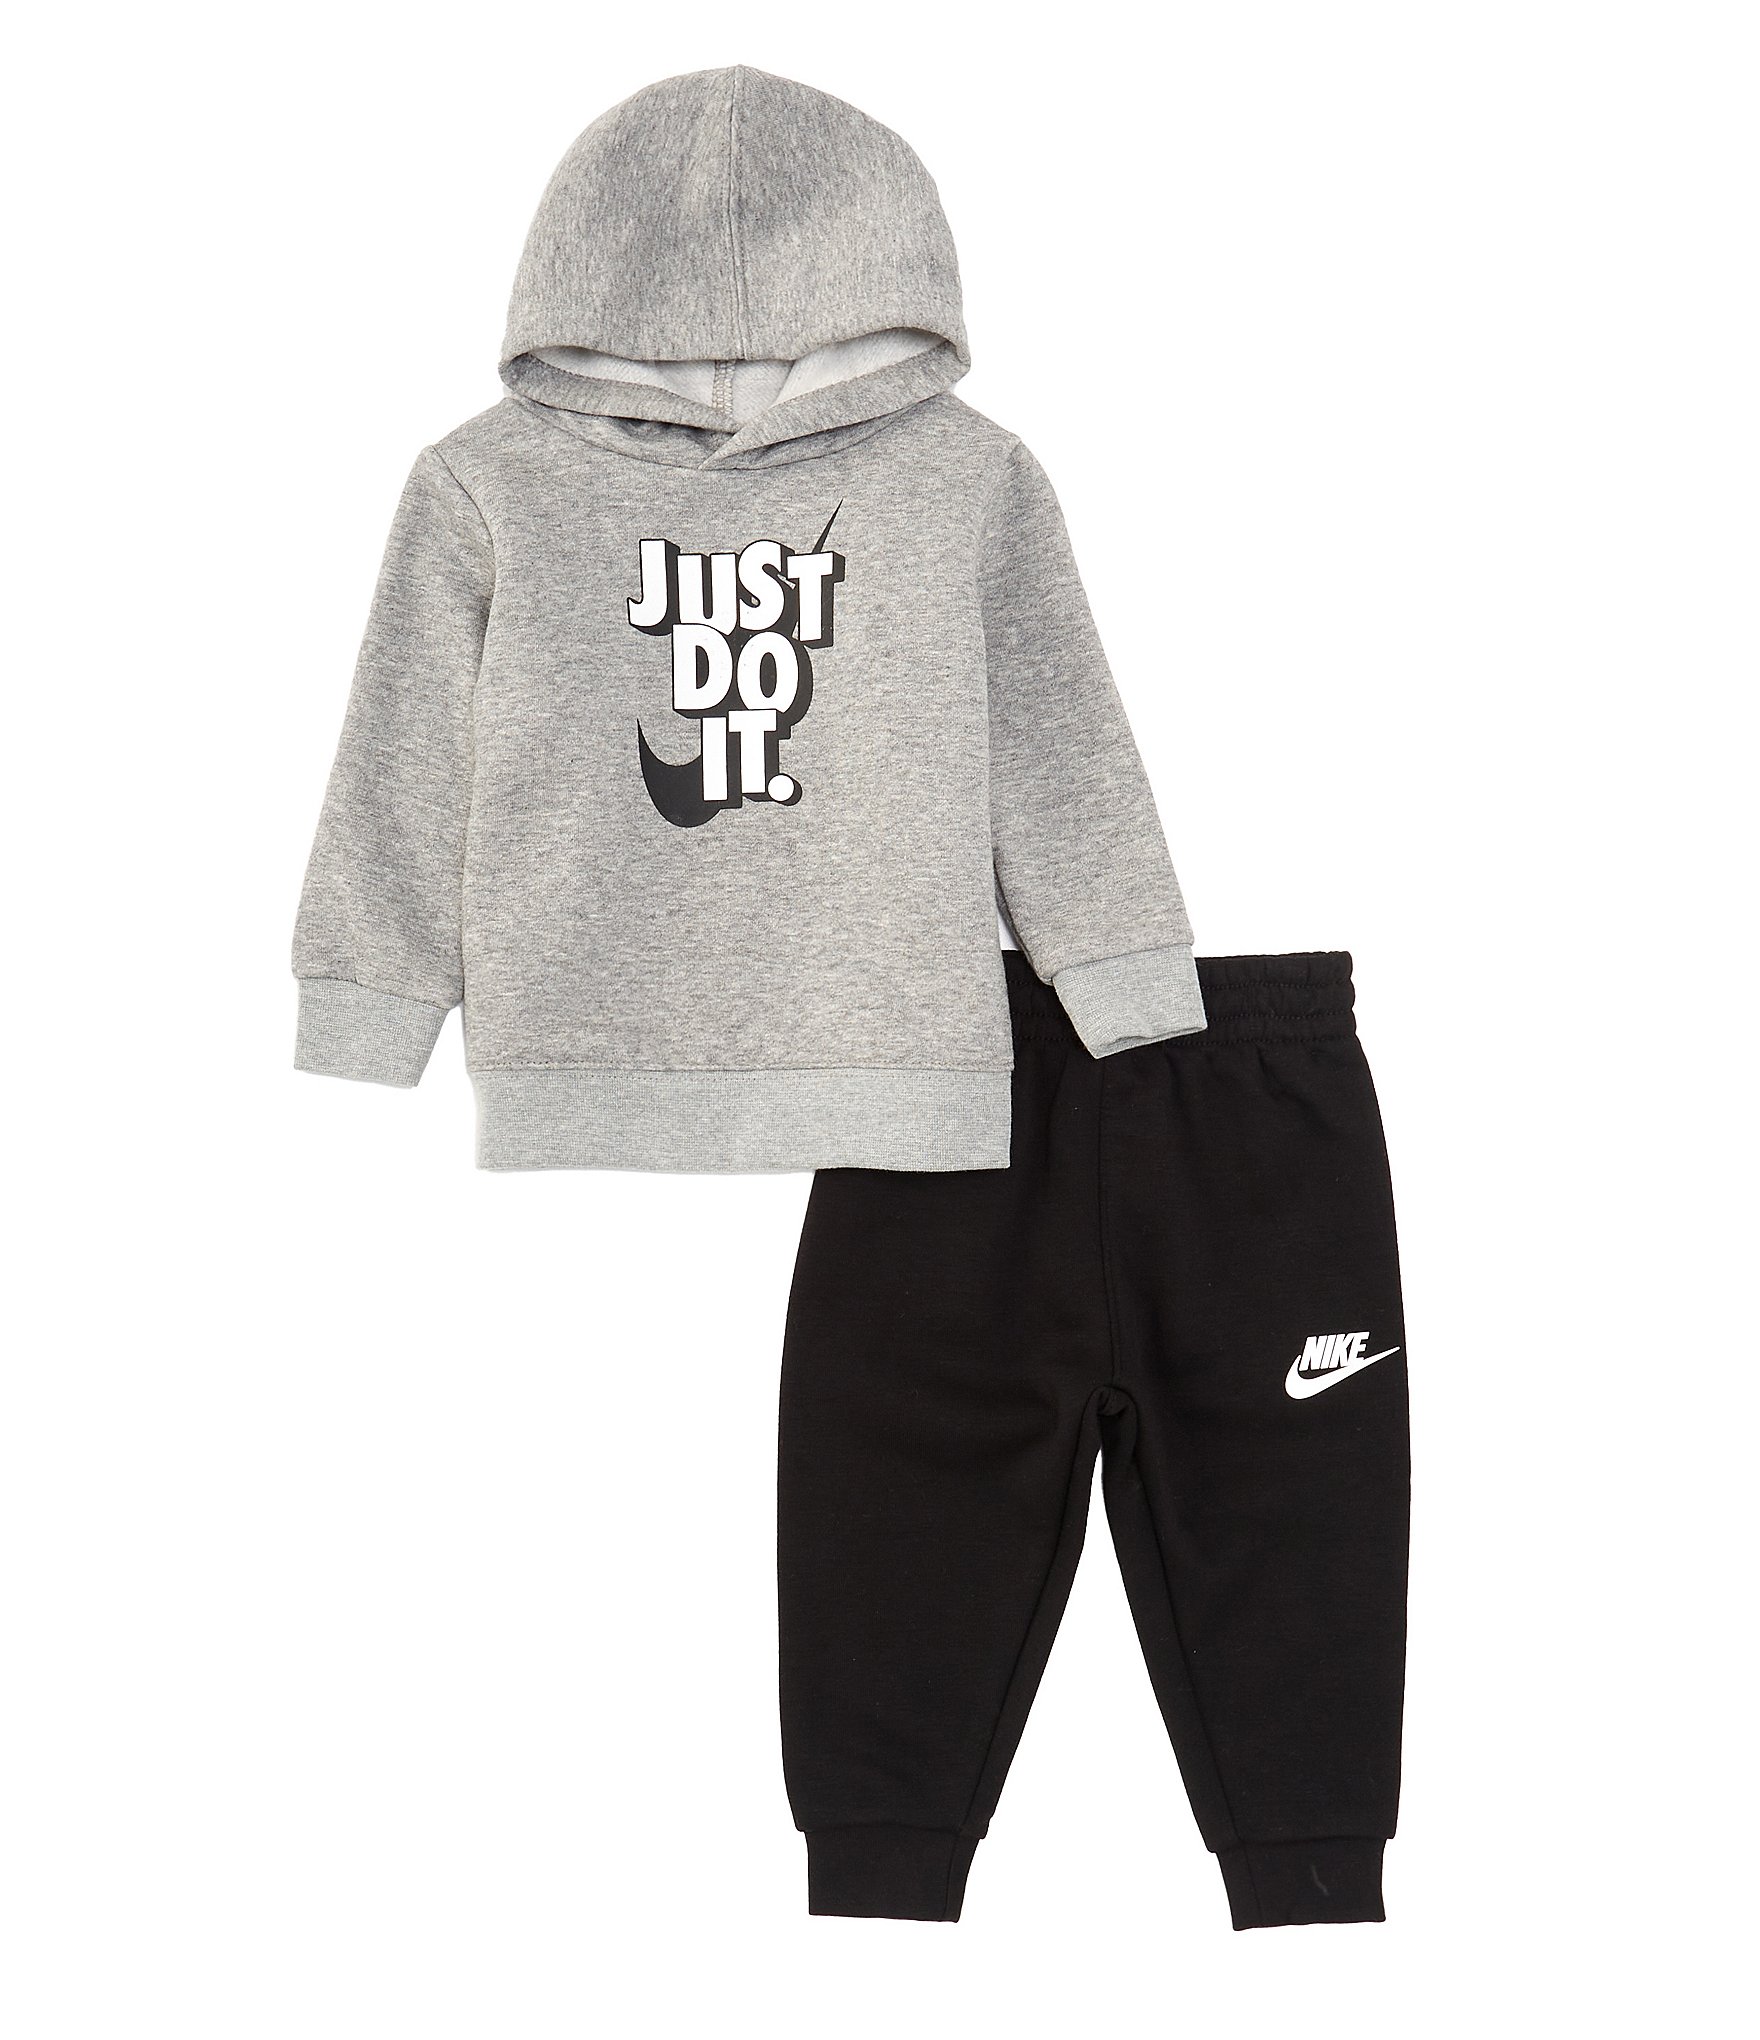 https://dimg.dillards.com/is/image/DillardsZoom/zoom/nike-baby-boys-12-24-months-long-sleeve-just-do-it-jersey-pullover-hoodie-and-joggers-set/00000000_zi_a69a9d14-4d32-49a6-bff7-e6f1861a2bff.jpg